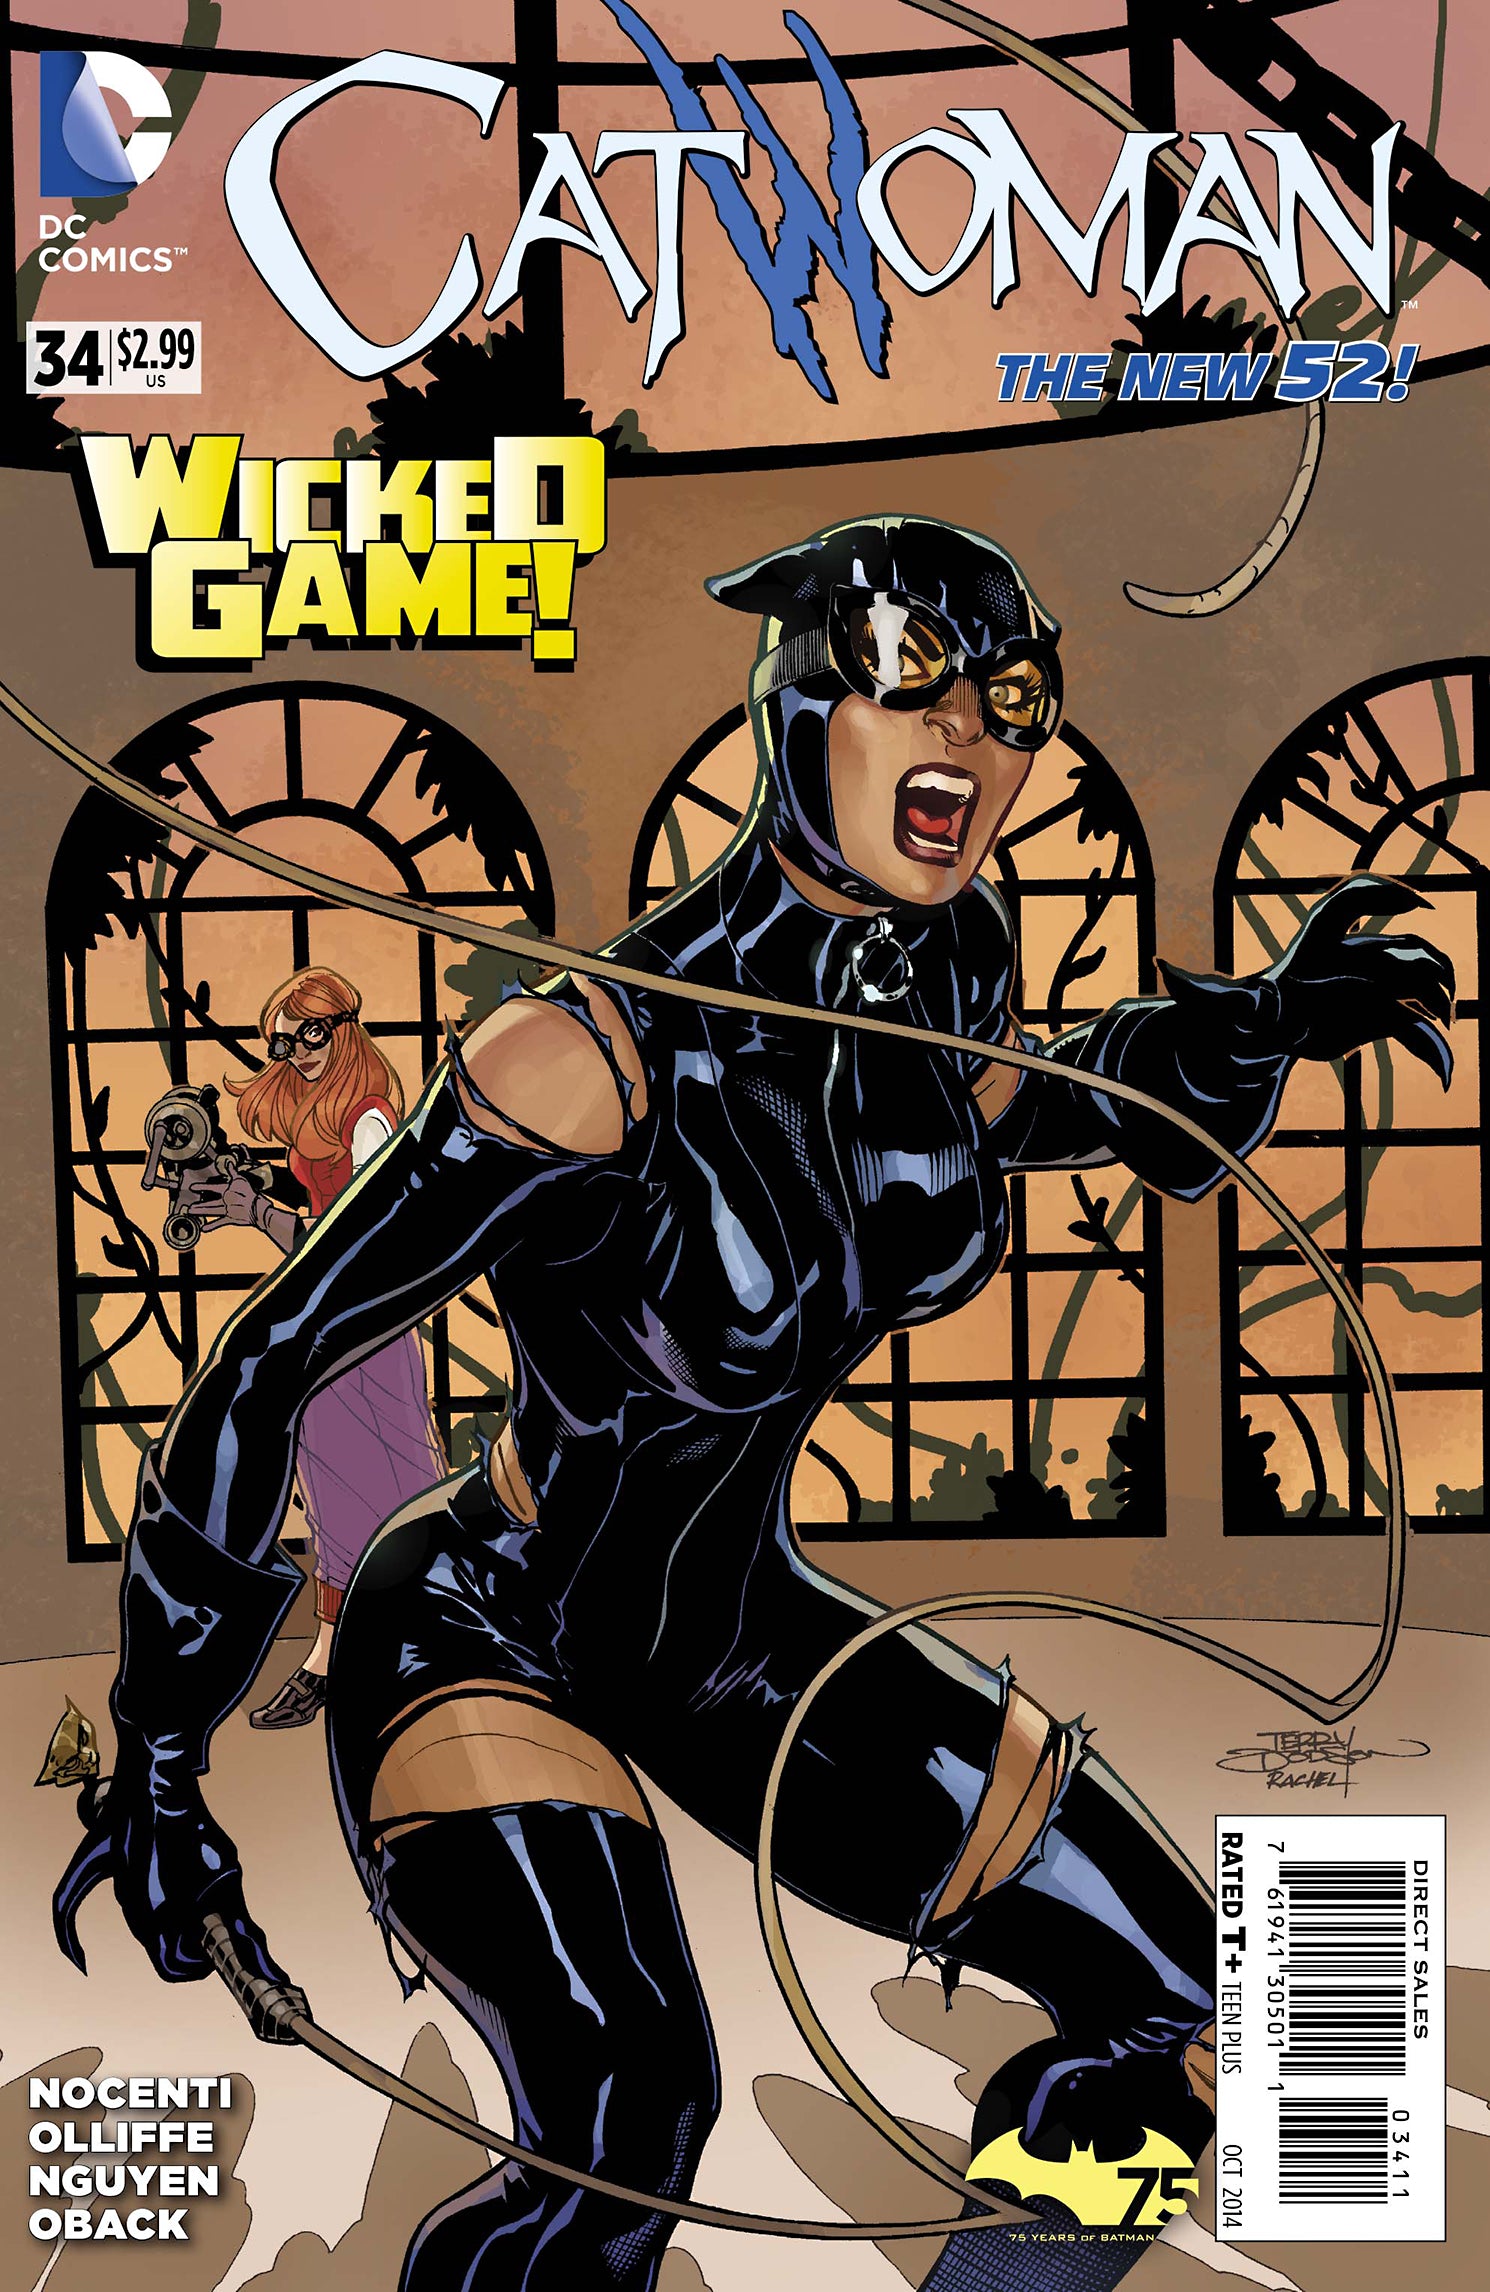 CATWOMAN #34 | Game Master's Emporium (The New GME)